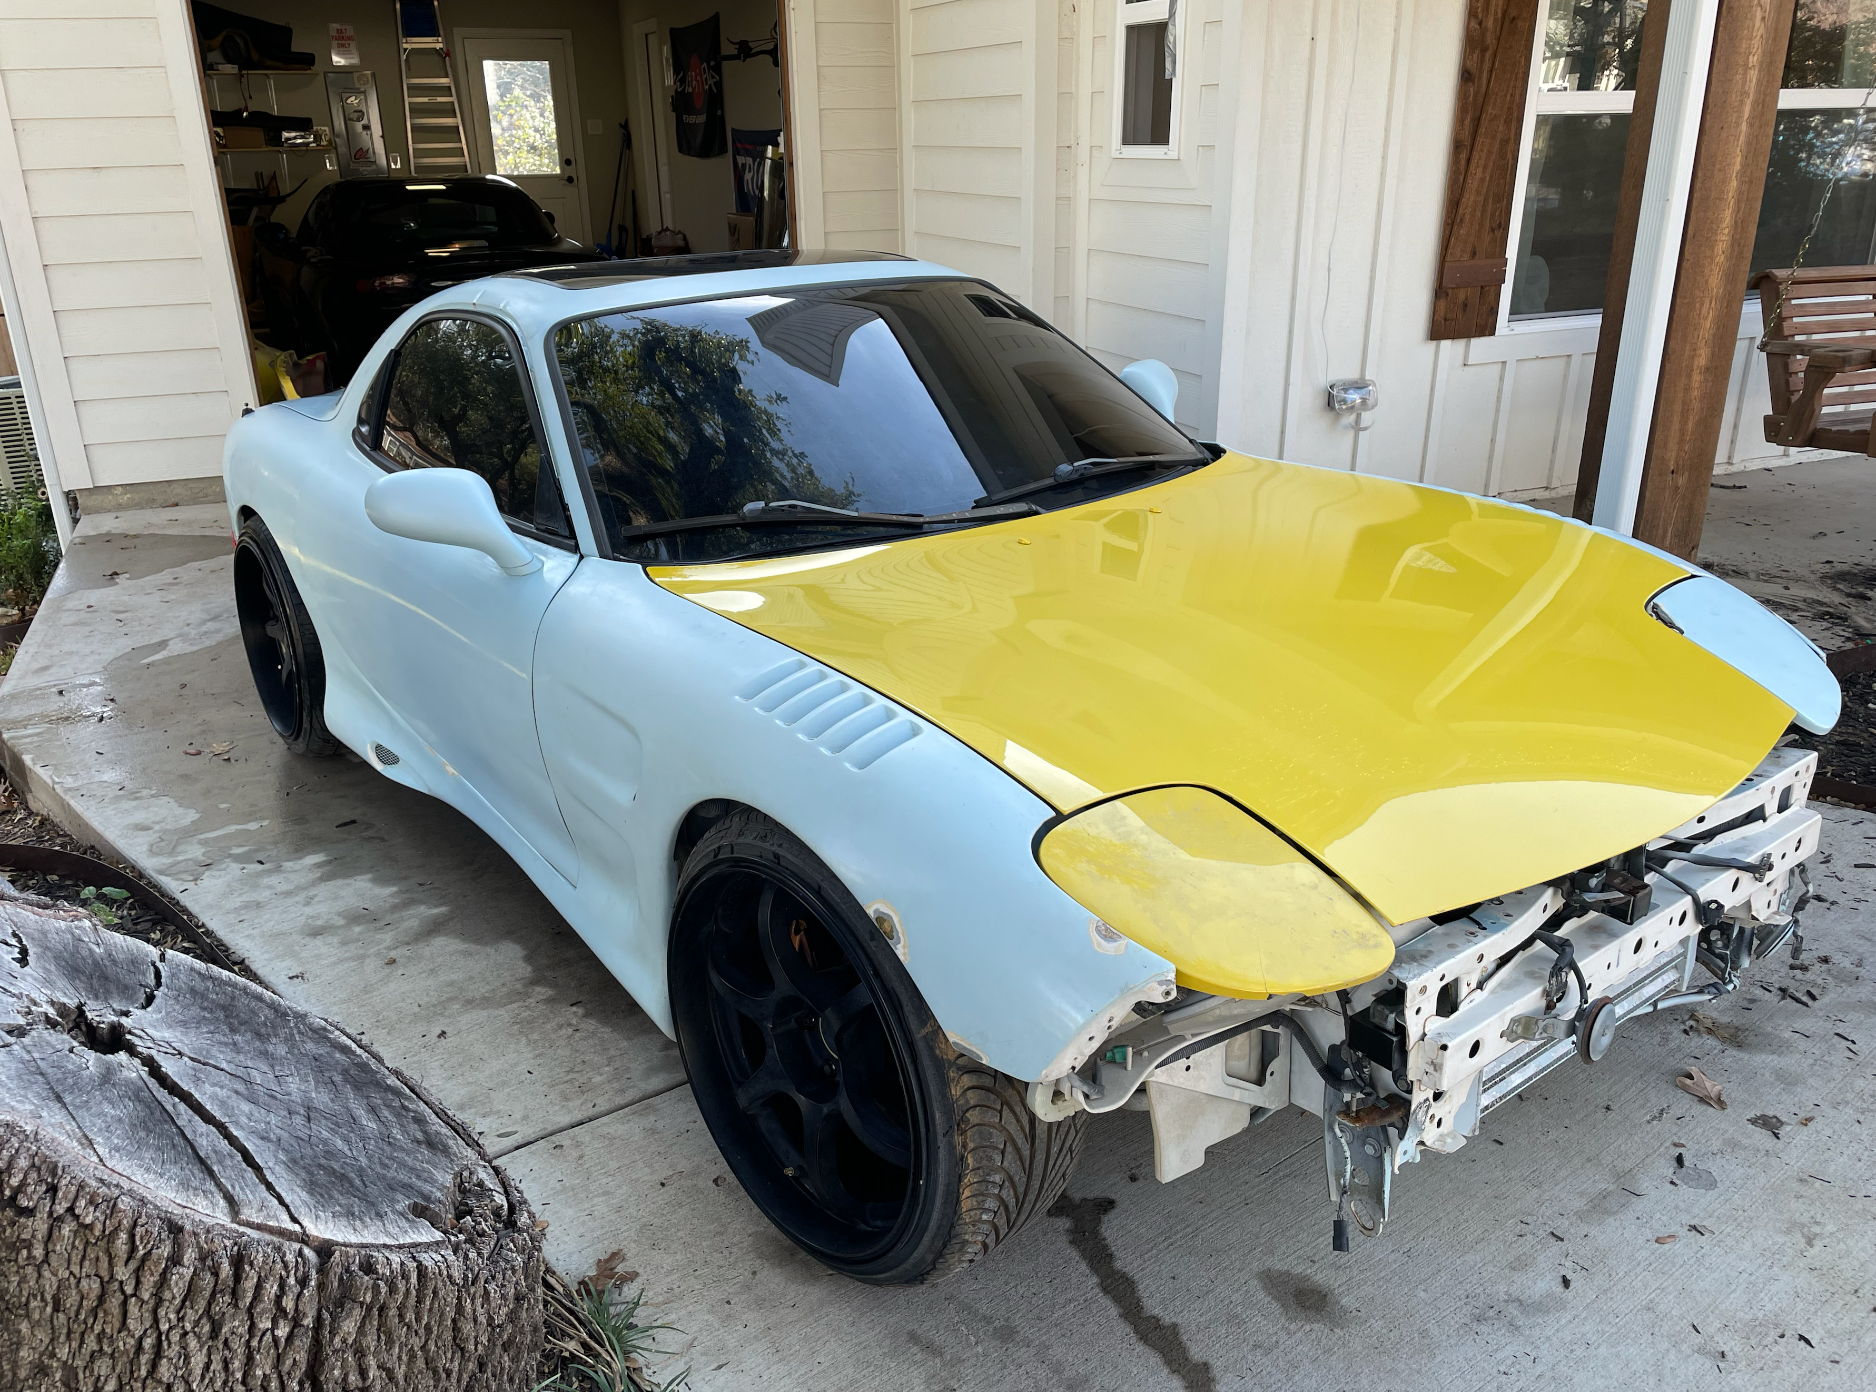 1994 Mazda RX-7 - 1994 Chaste White RX-7 - 79k miles - Upgrades - Needs paint - Used - VIN JM1FD3336R0303240 - 79,000 Miles - Other - 2WD - Manual - Coupe - White - Fort Worth, TX 76111, United States